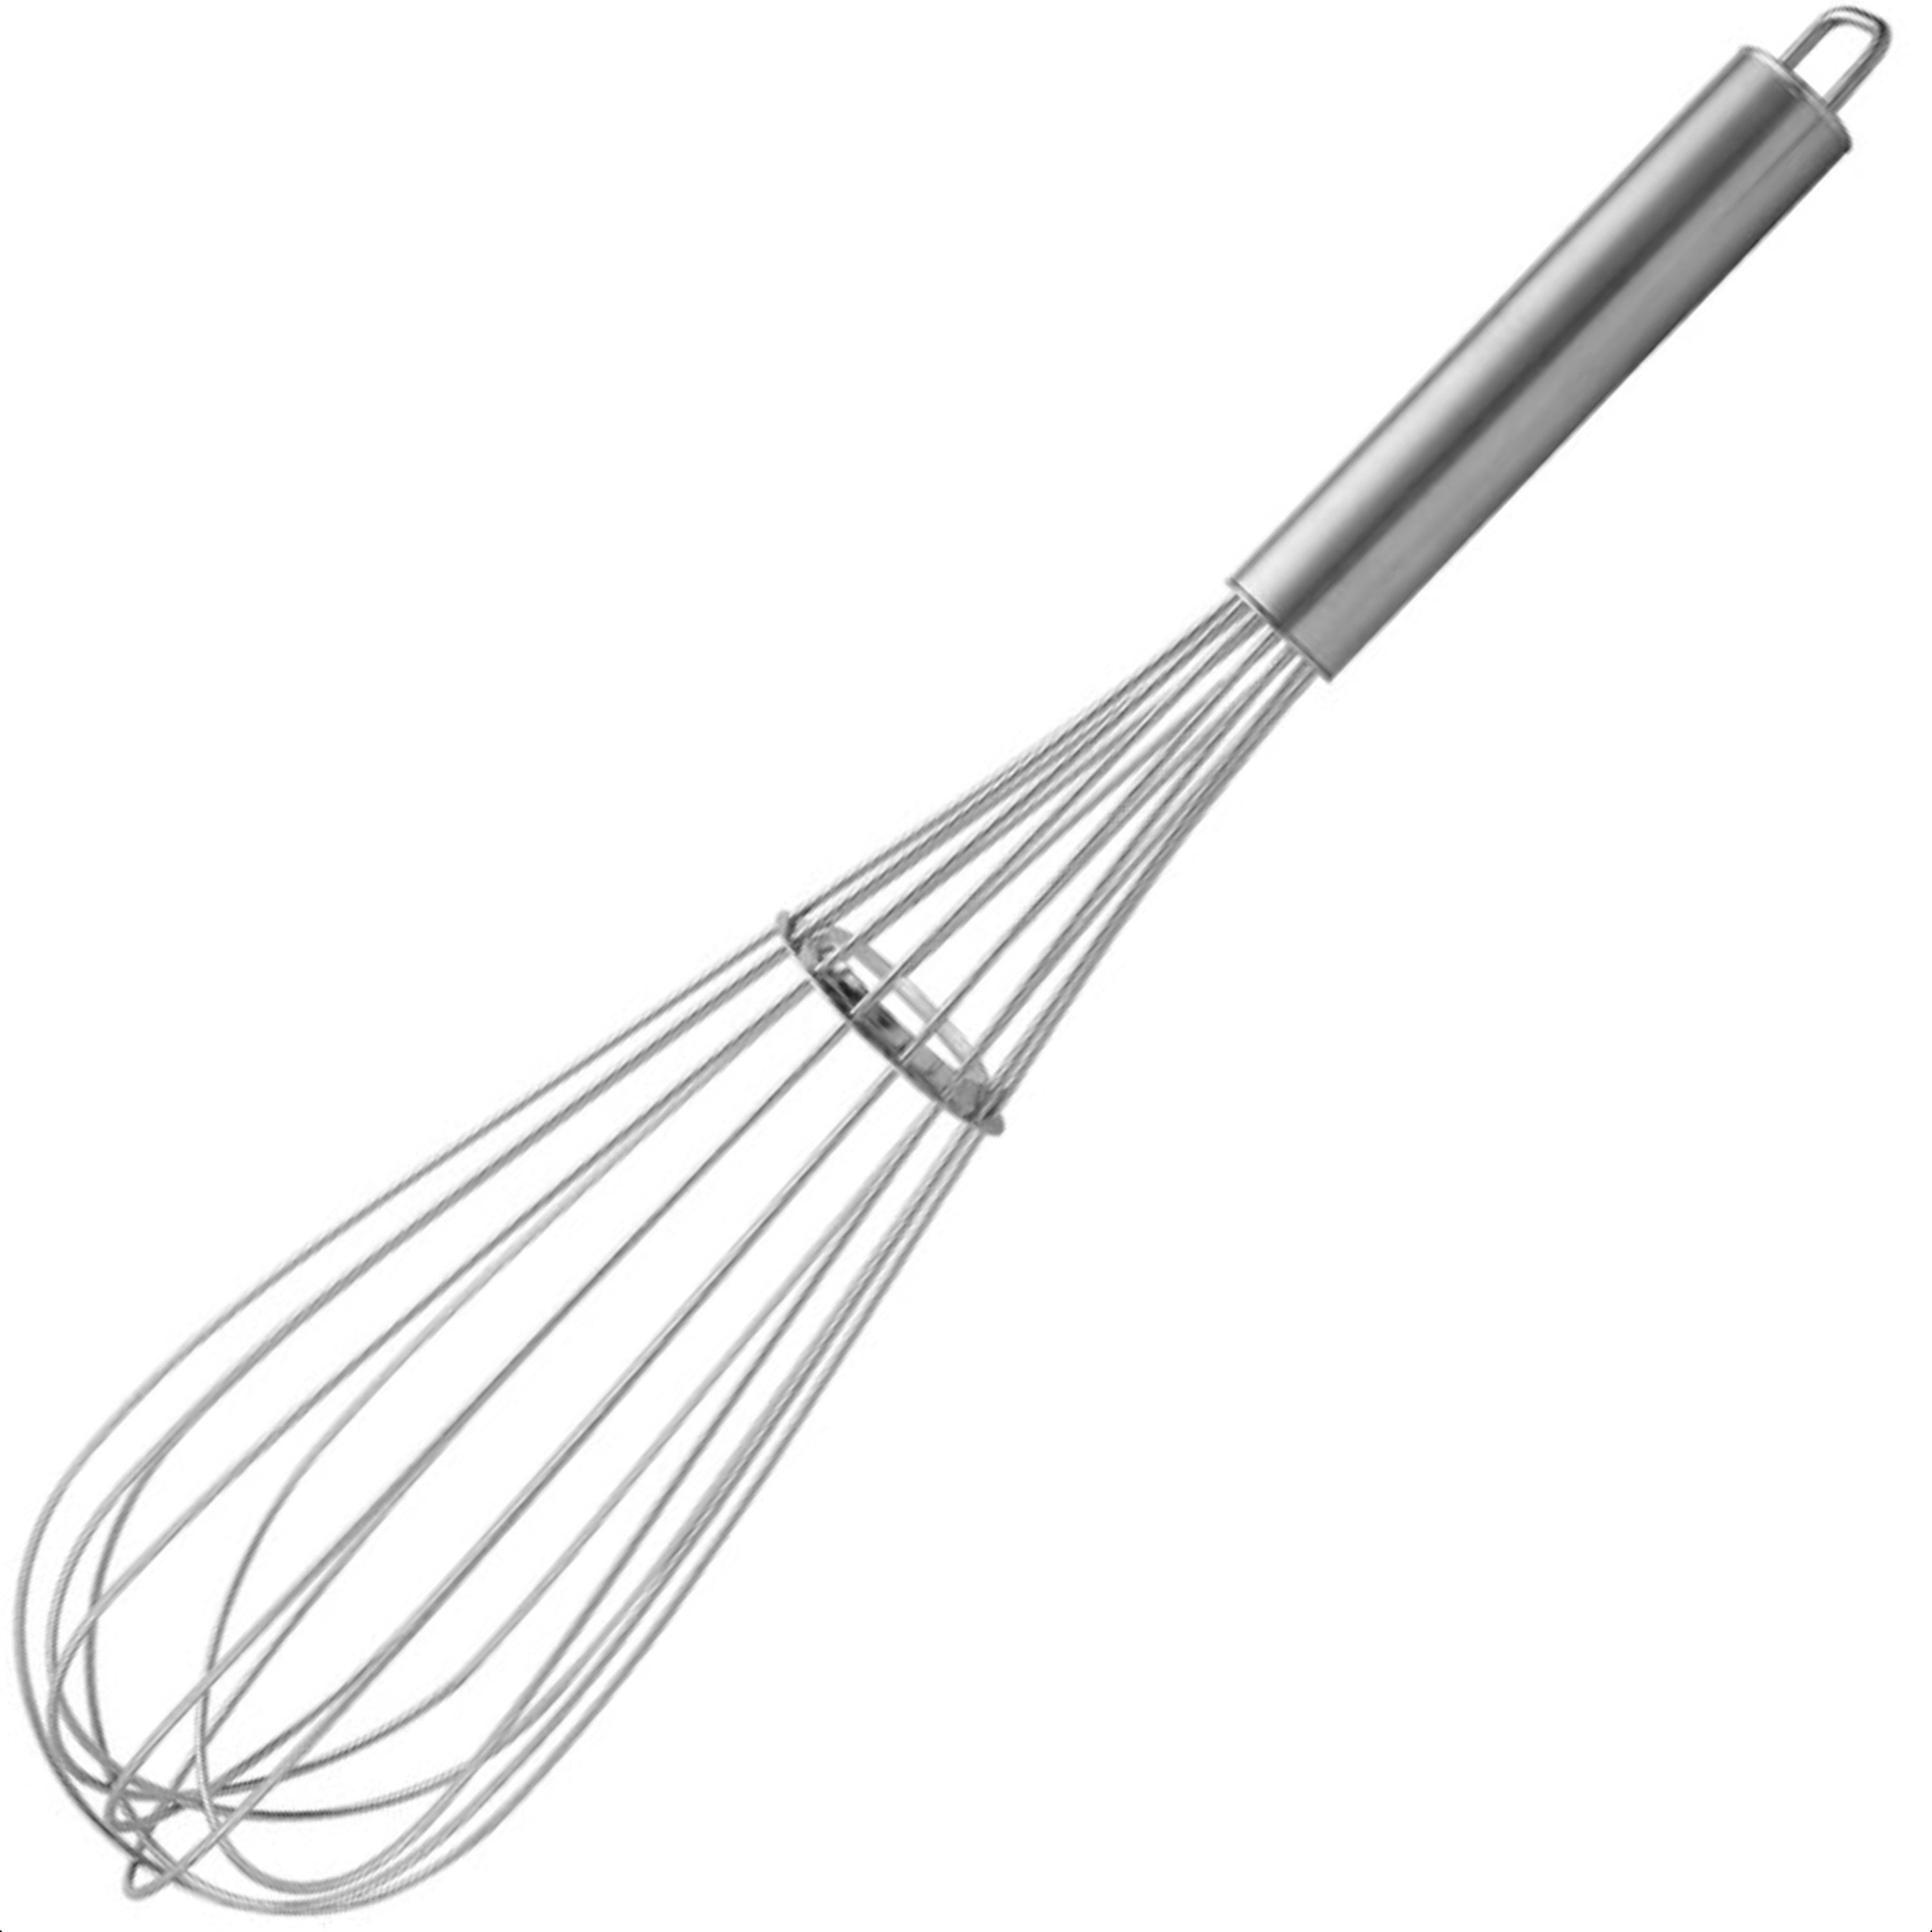 KOWS Pipe handle 2.0mm whisk 35 cm (WK0017)